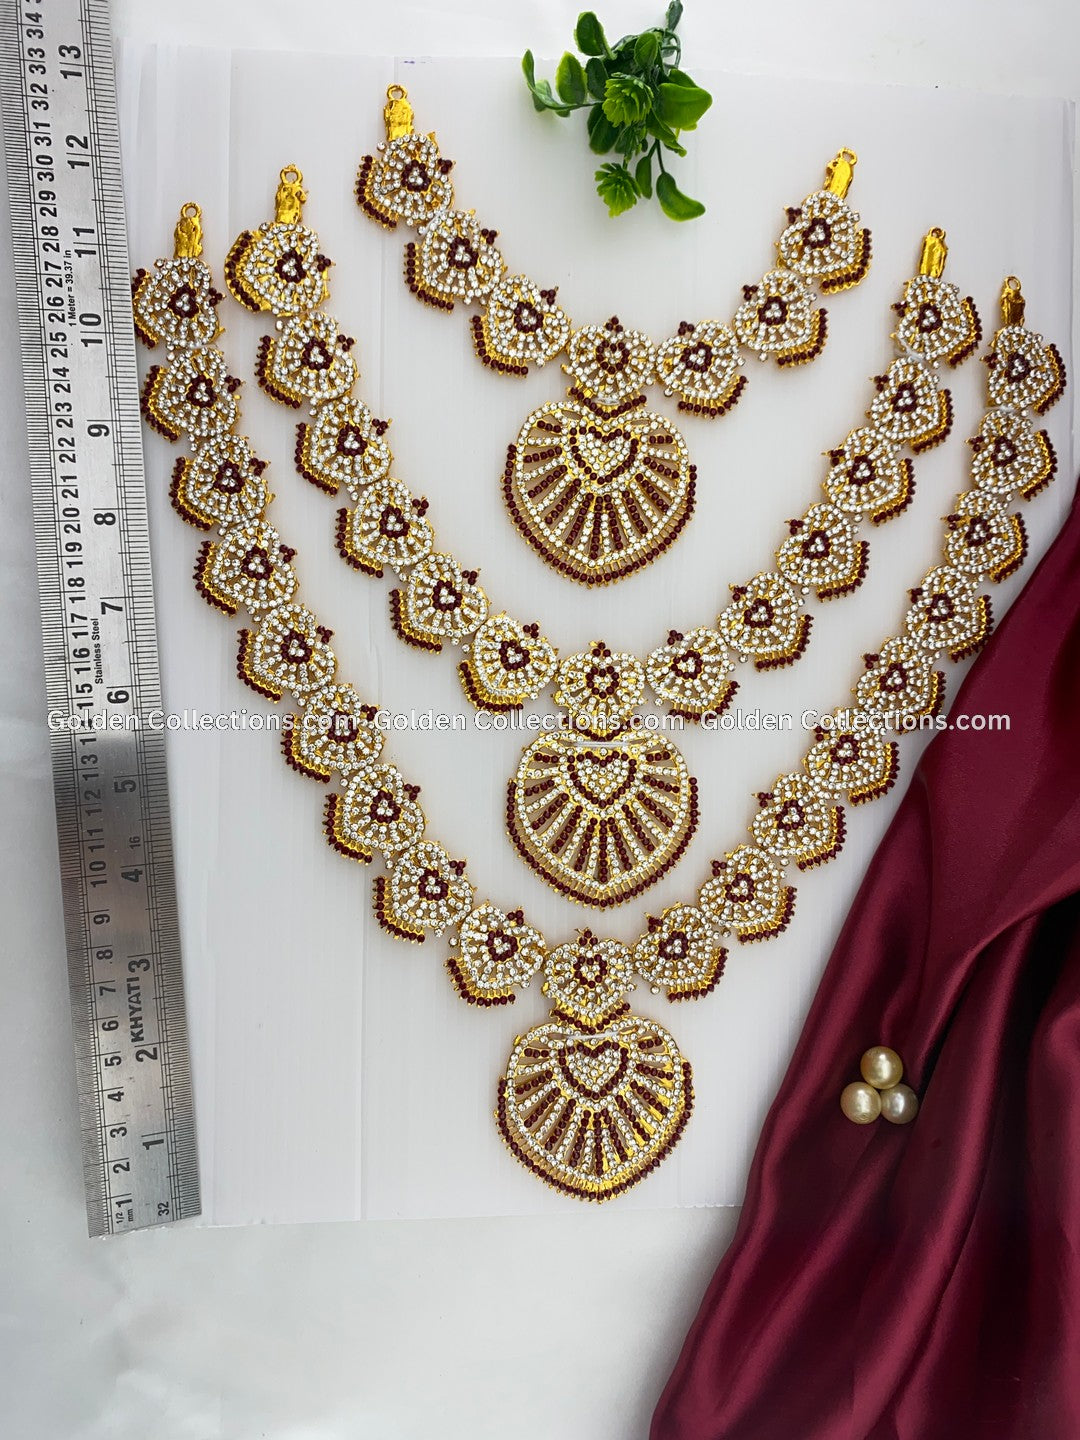 Deity Long Necklace for Devotees - GoldenCollections DLN-008 2